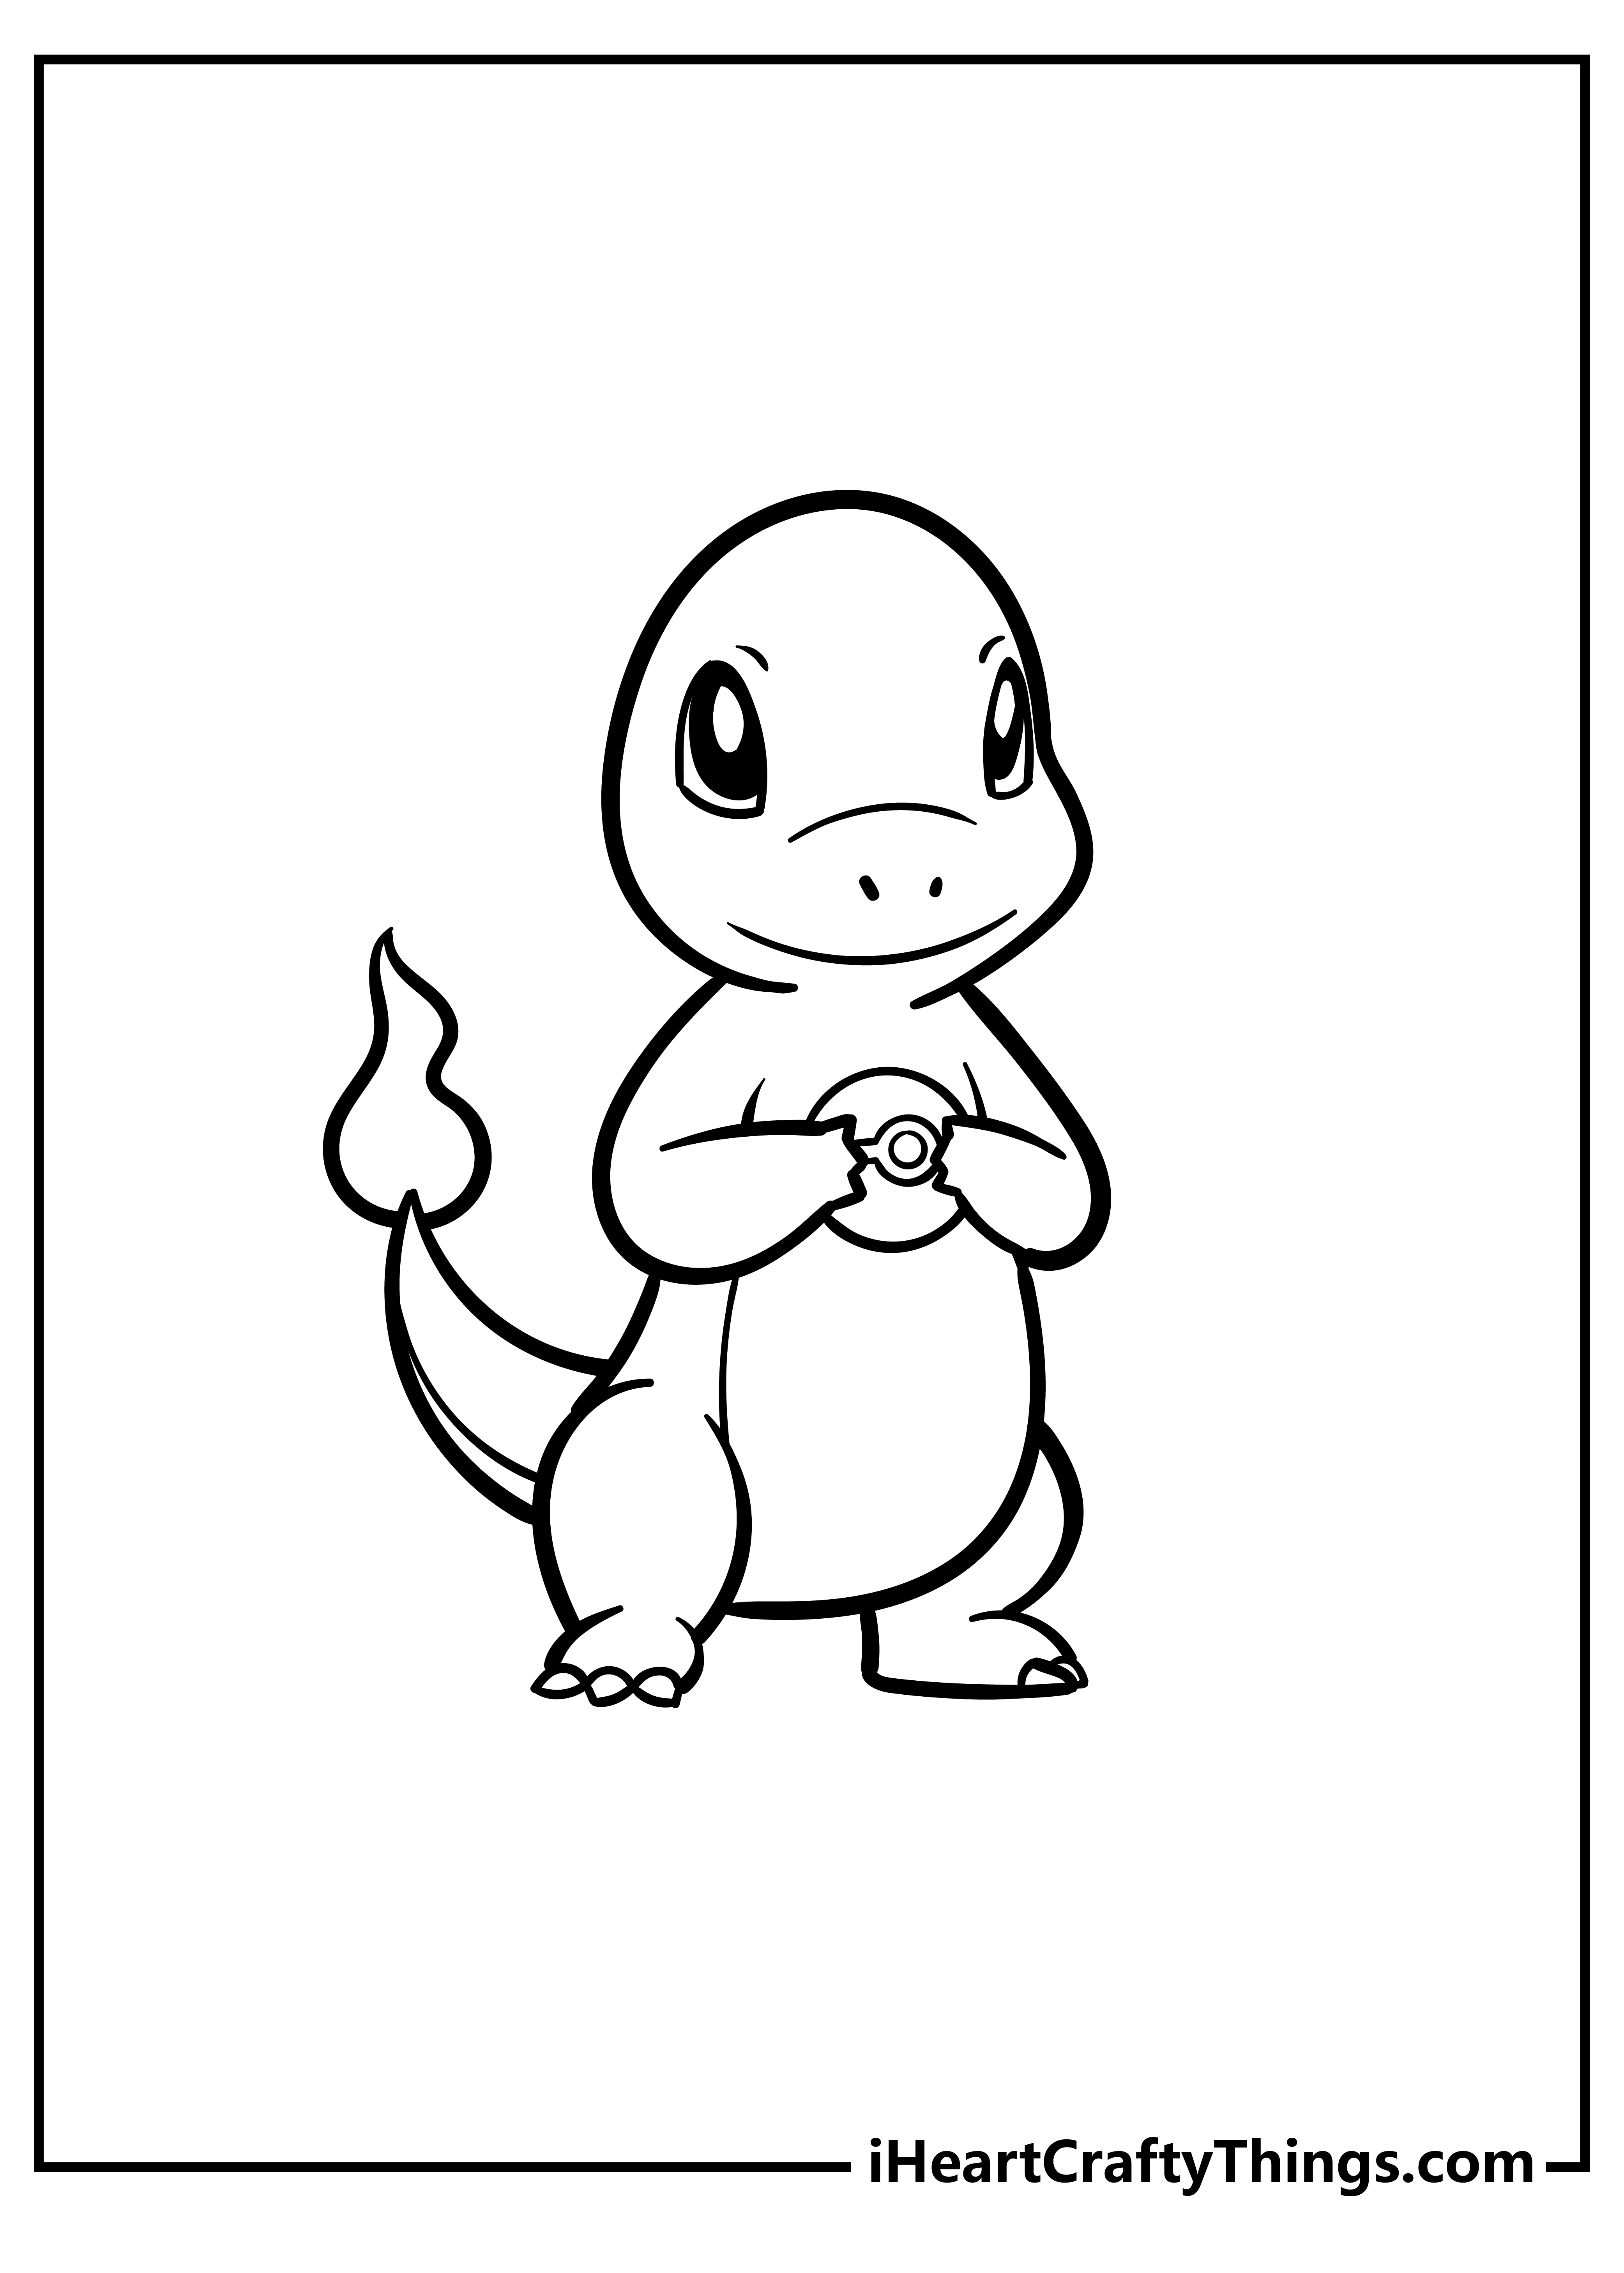 Charmander Coloring Pages for adults free printable